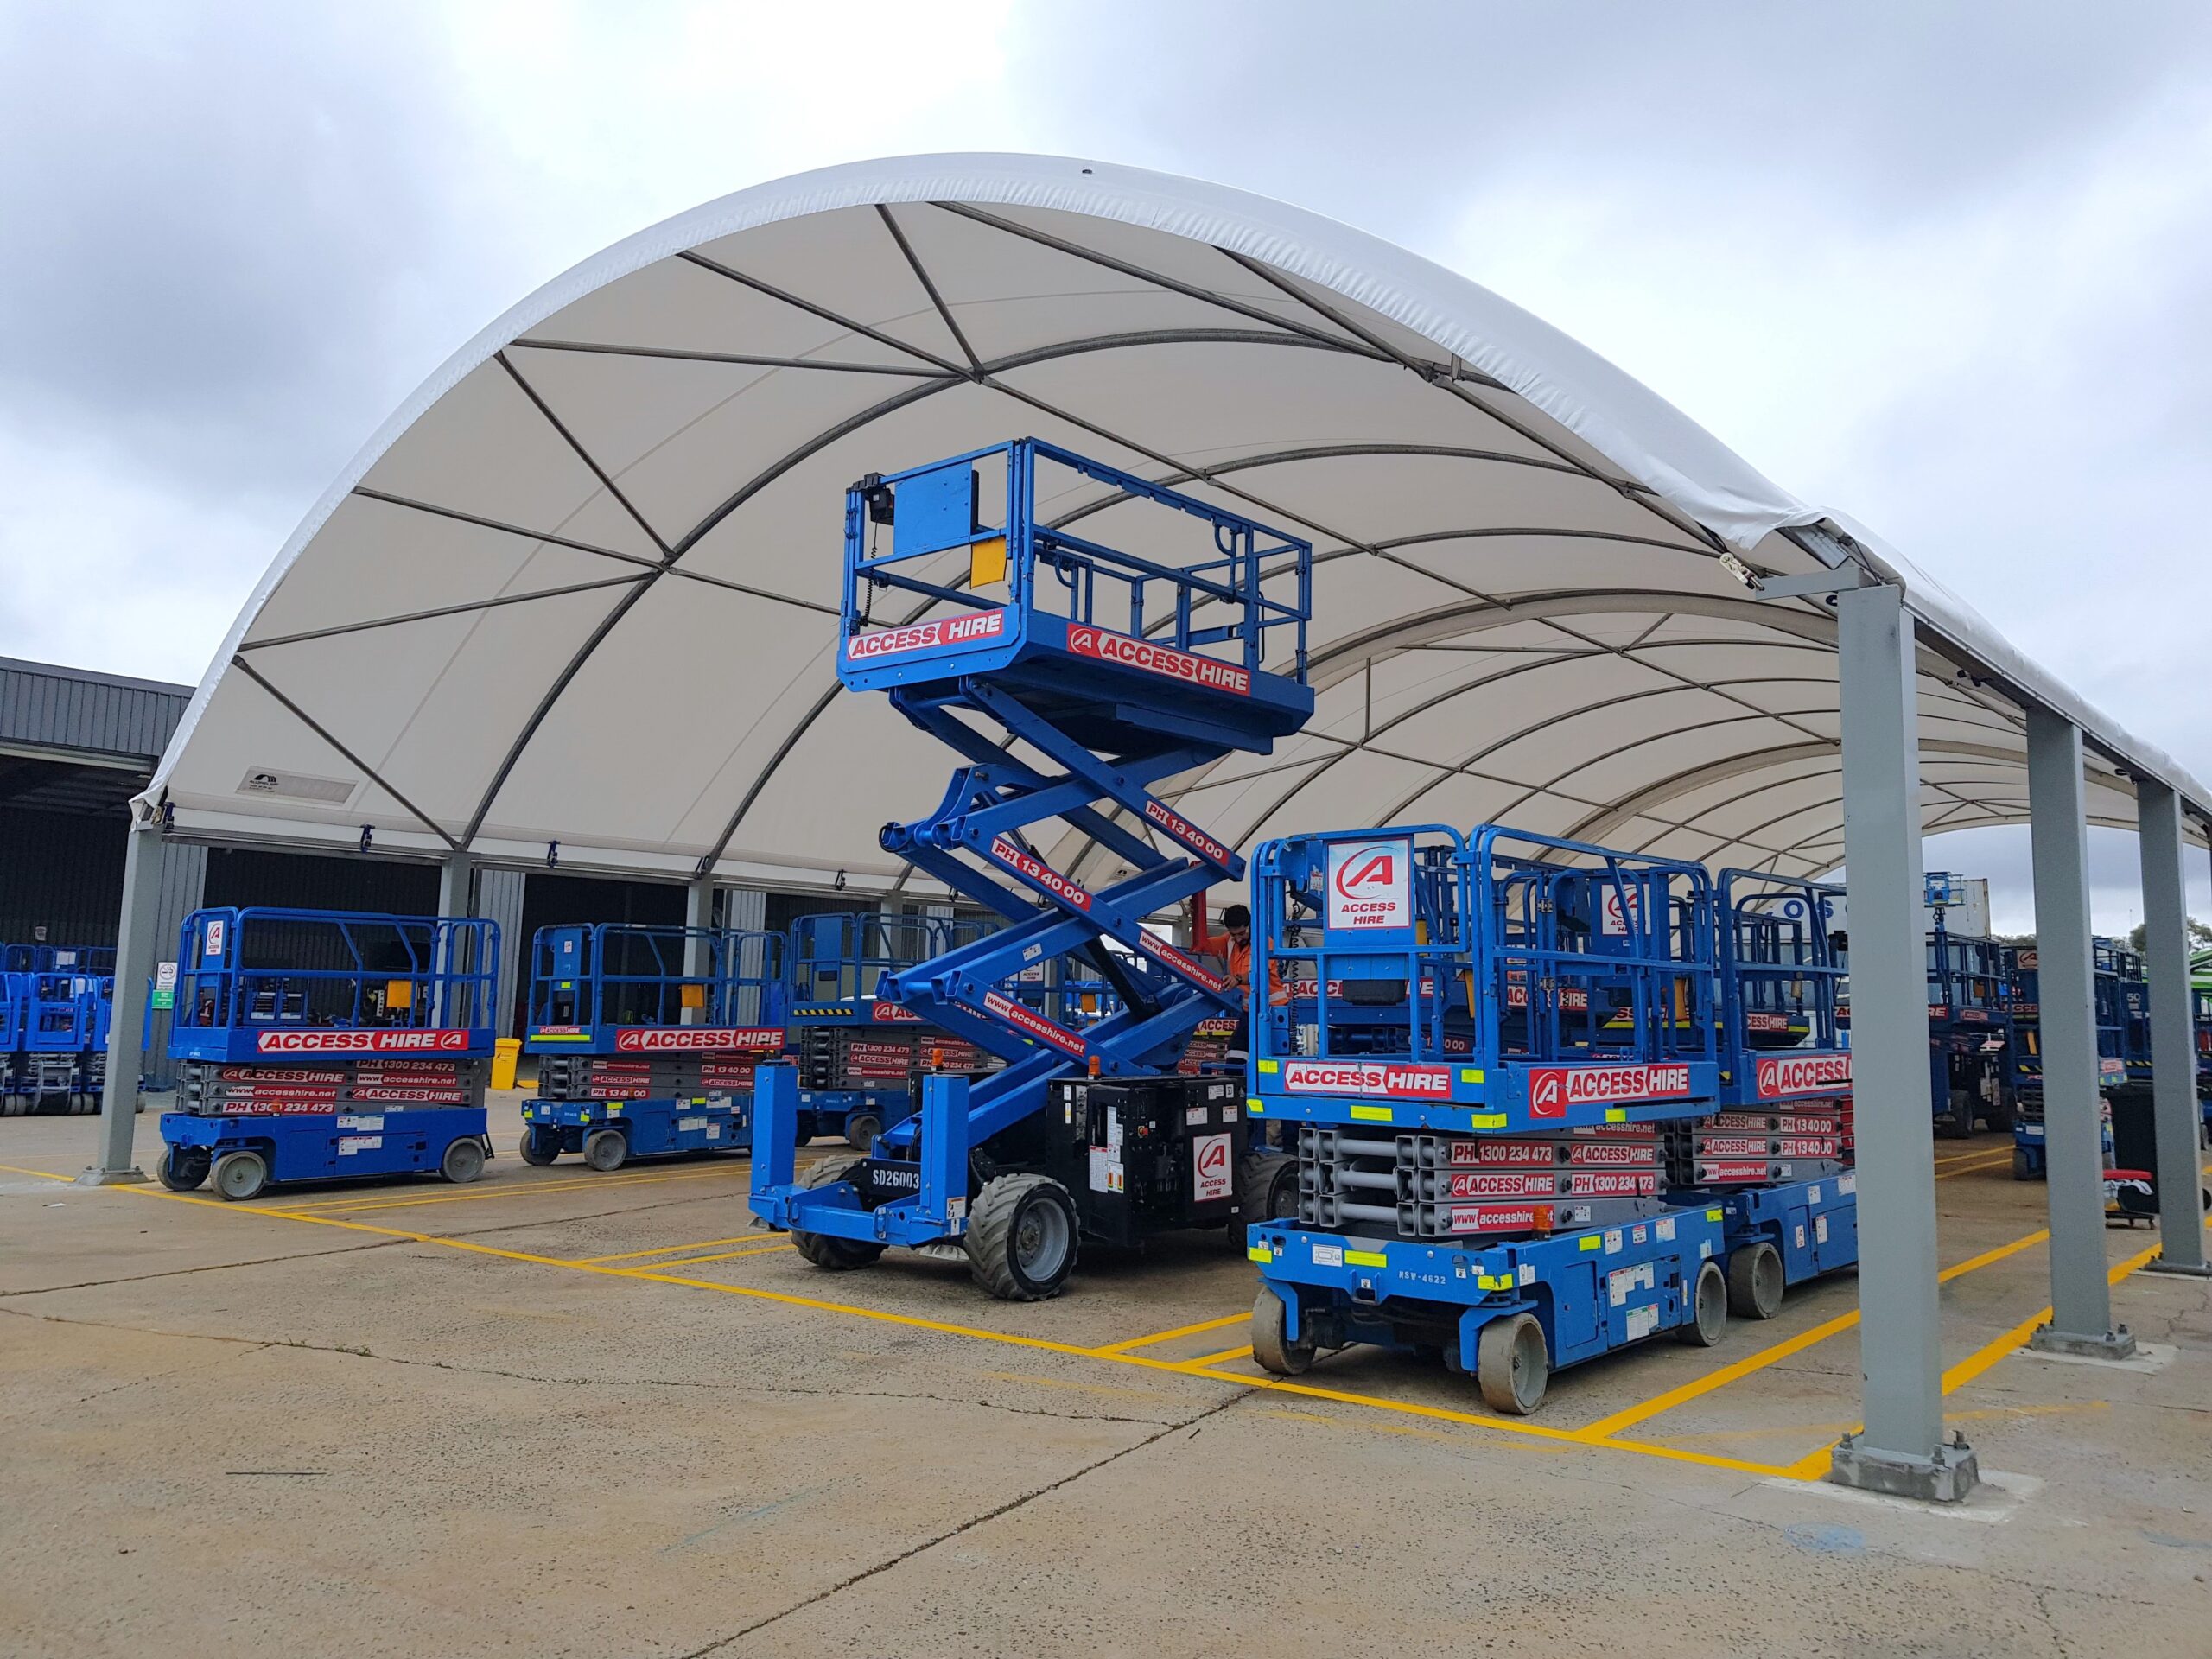 Benefit from cost reduction in the manufacturing industry by using a fabric shelter